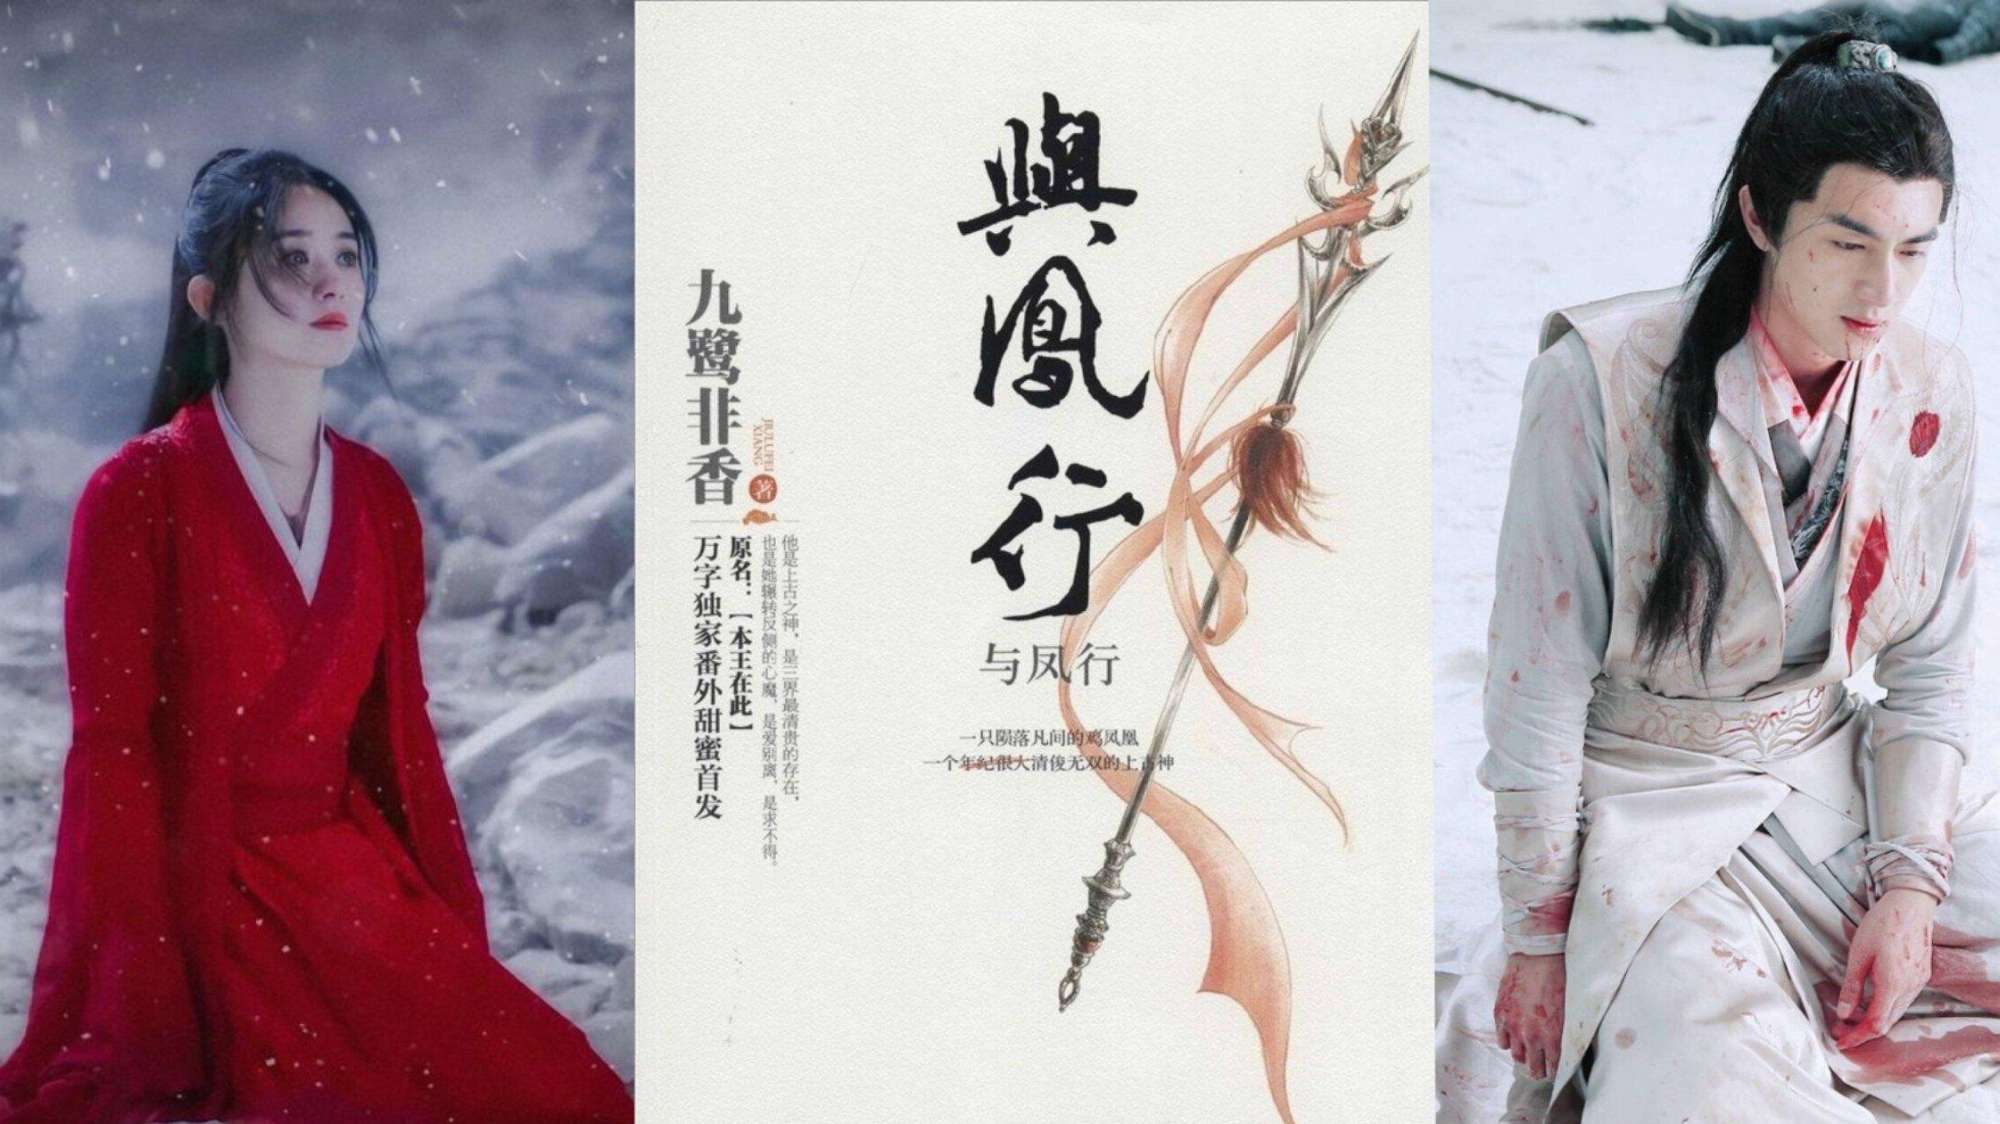 Fans of So Kieu Story actively support Du Phuong Hanh, hoping for a good ending for Chu Kieu and Vu Van Nguyet